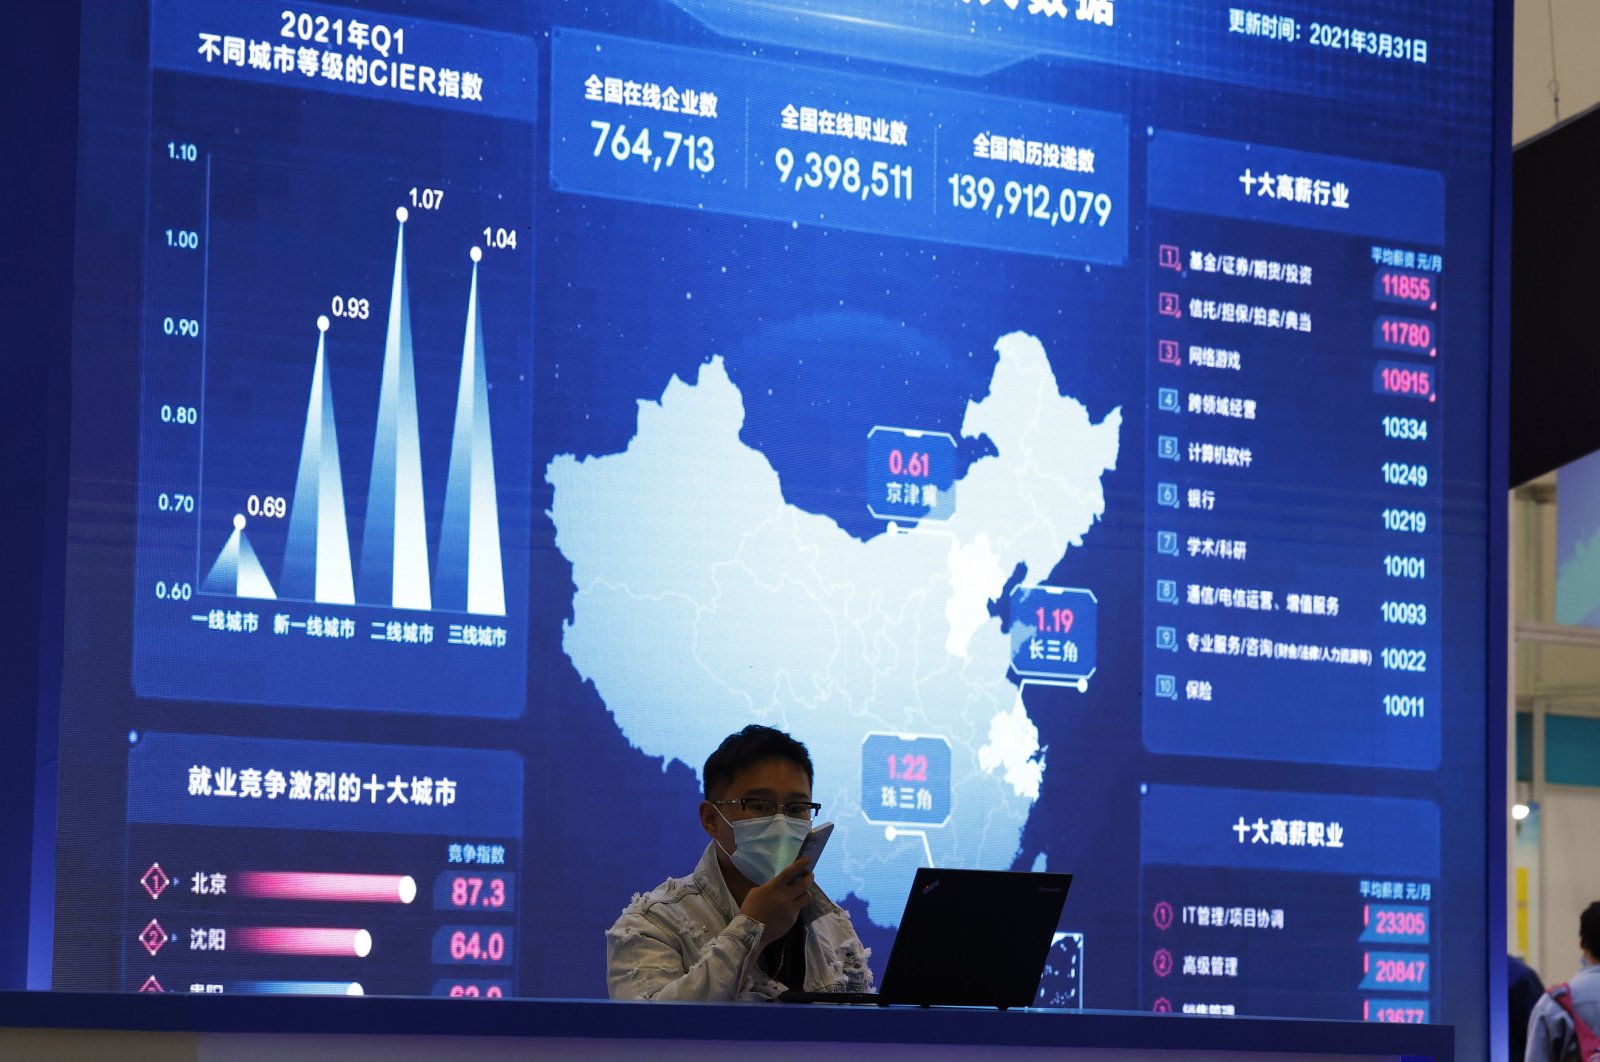 A man speaks on his phone near a giant display showing big data and a map of China at an internet fair in Beijing, China, April 30, 2021. (AP Photo)